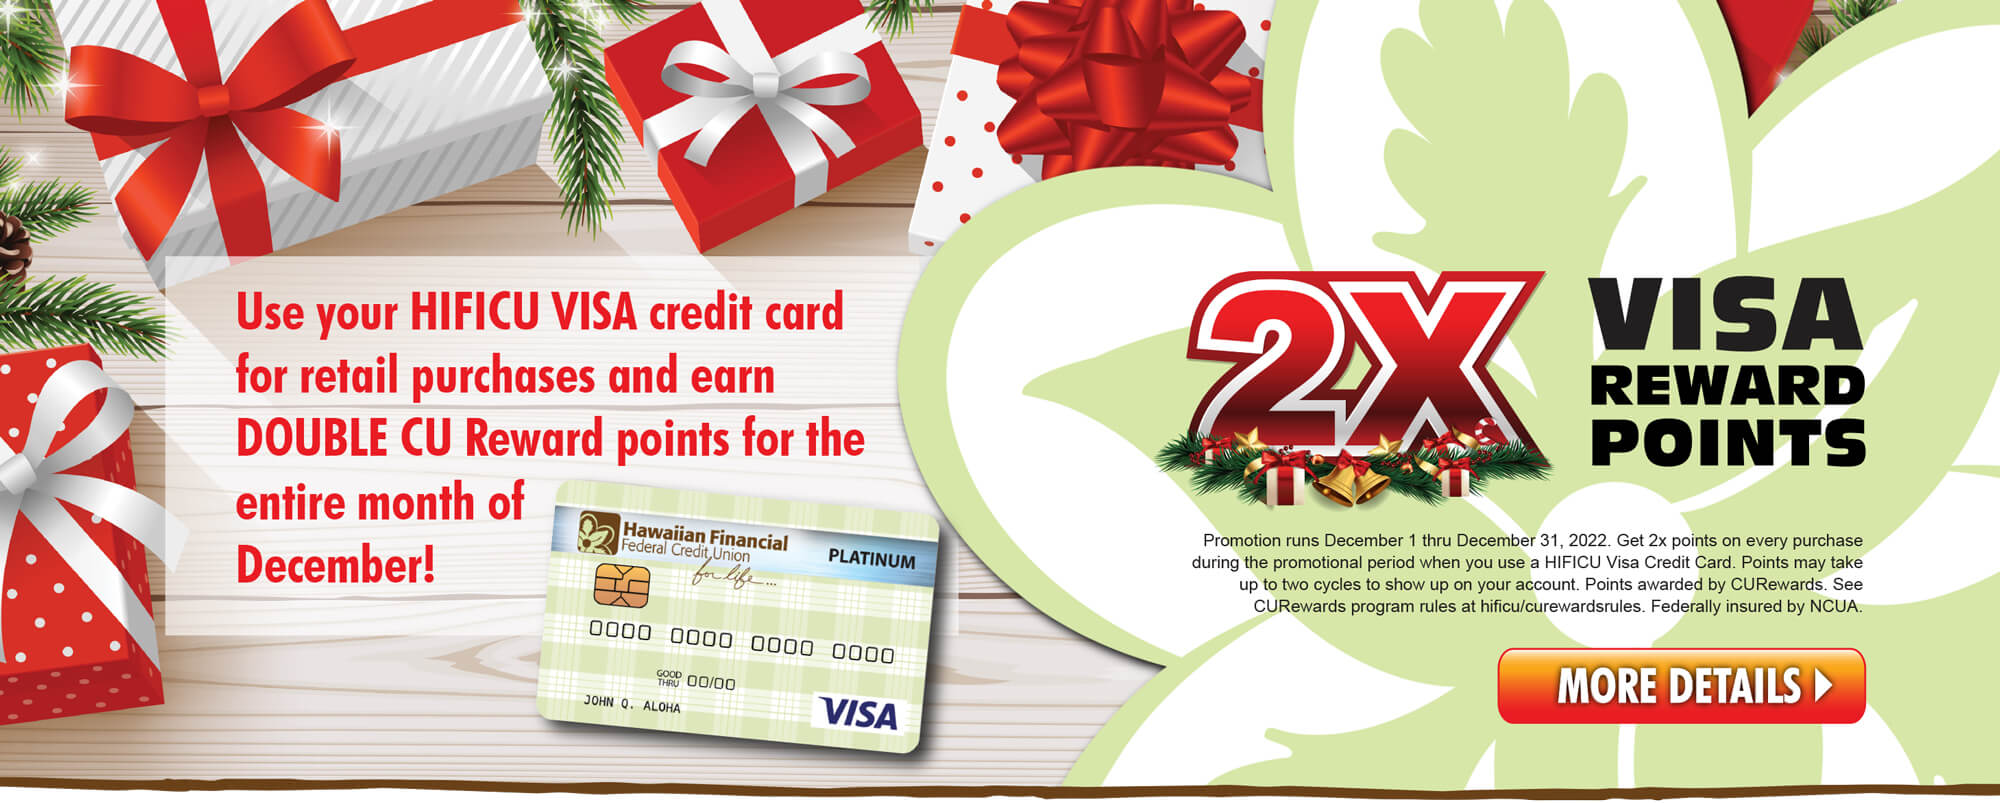 Earn 2x CU Rewards Points when you use your HIFICU VISA Credit Card in December!